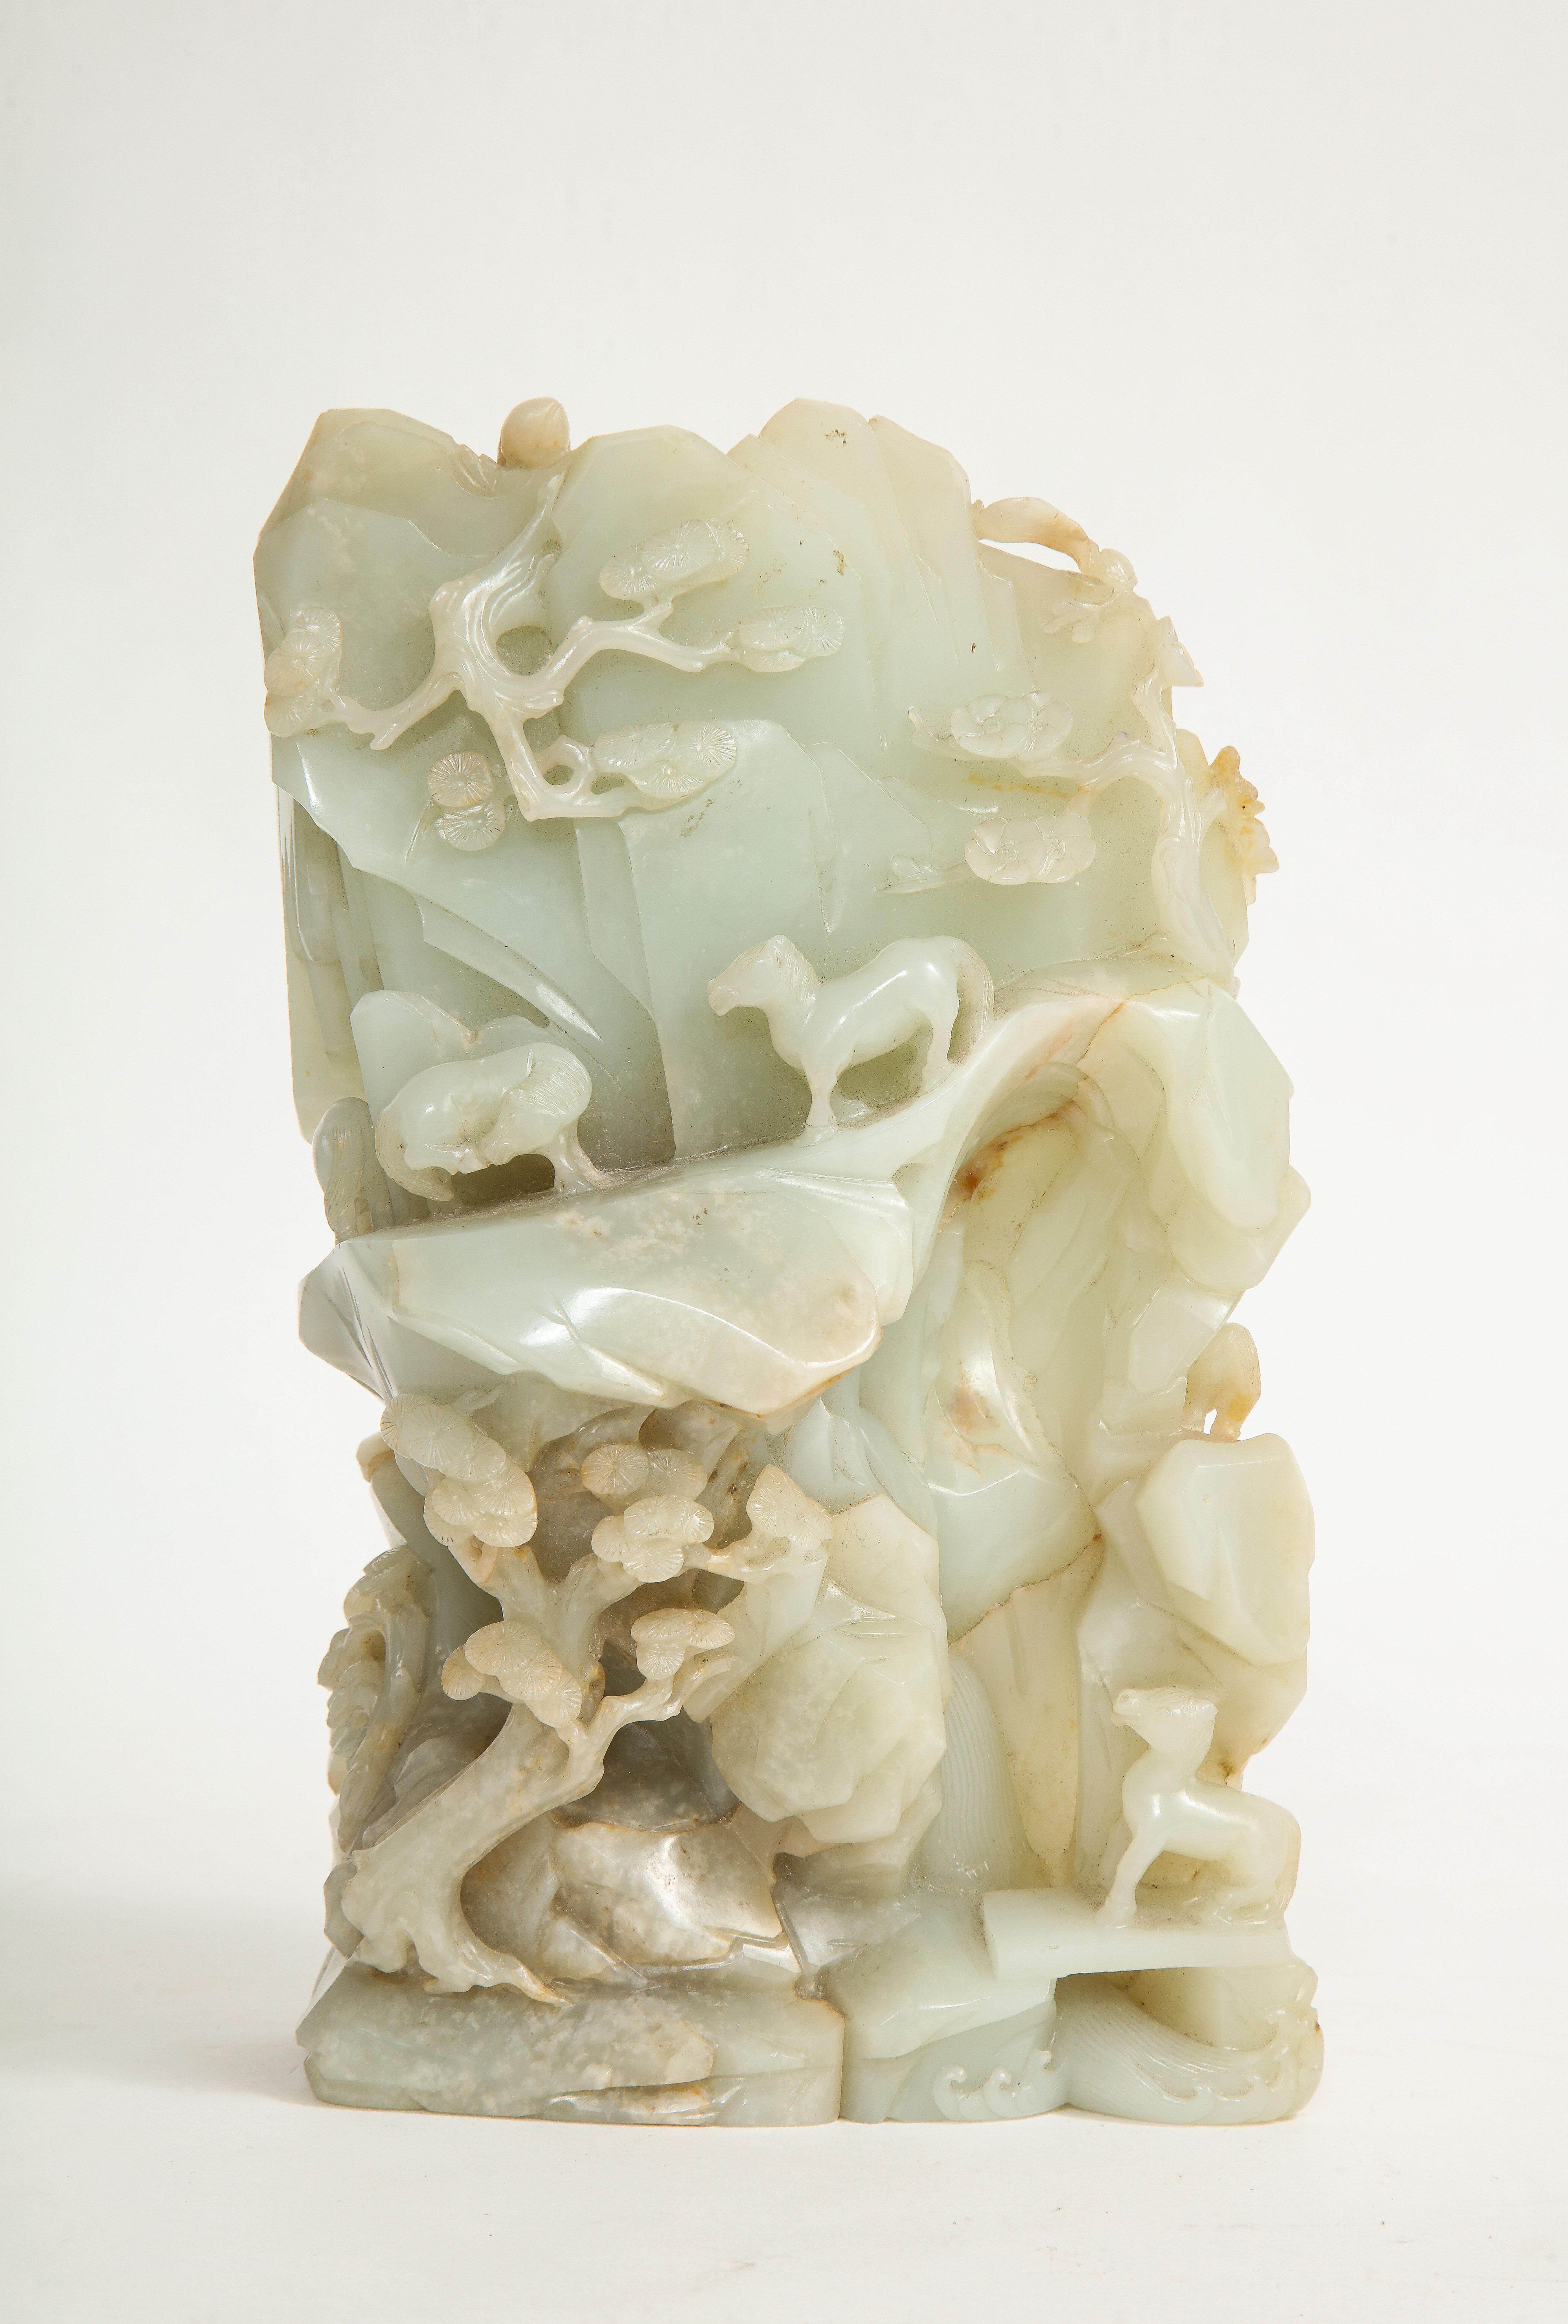 An incredible 18th/19th century Chinese Qing dynasty pale Celadon Jade high relief hand-carved mountain. With 360 degrees of carved decoration, this jade mountain is truly magnificent. The front is gorgeous with variable levels of relief depicting